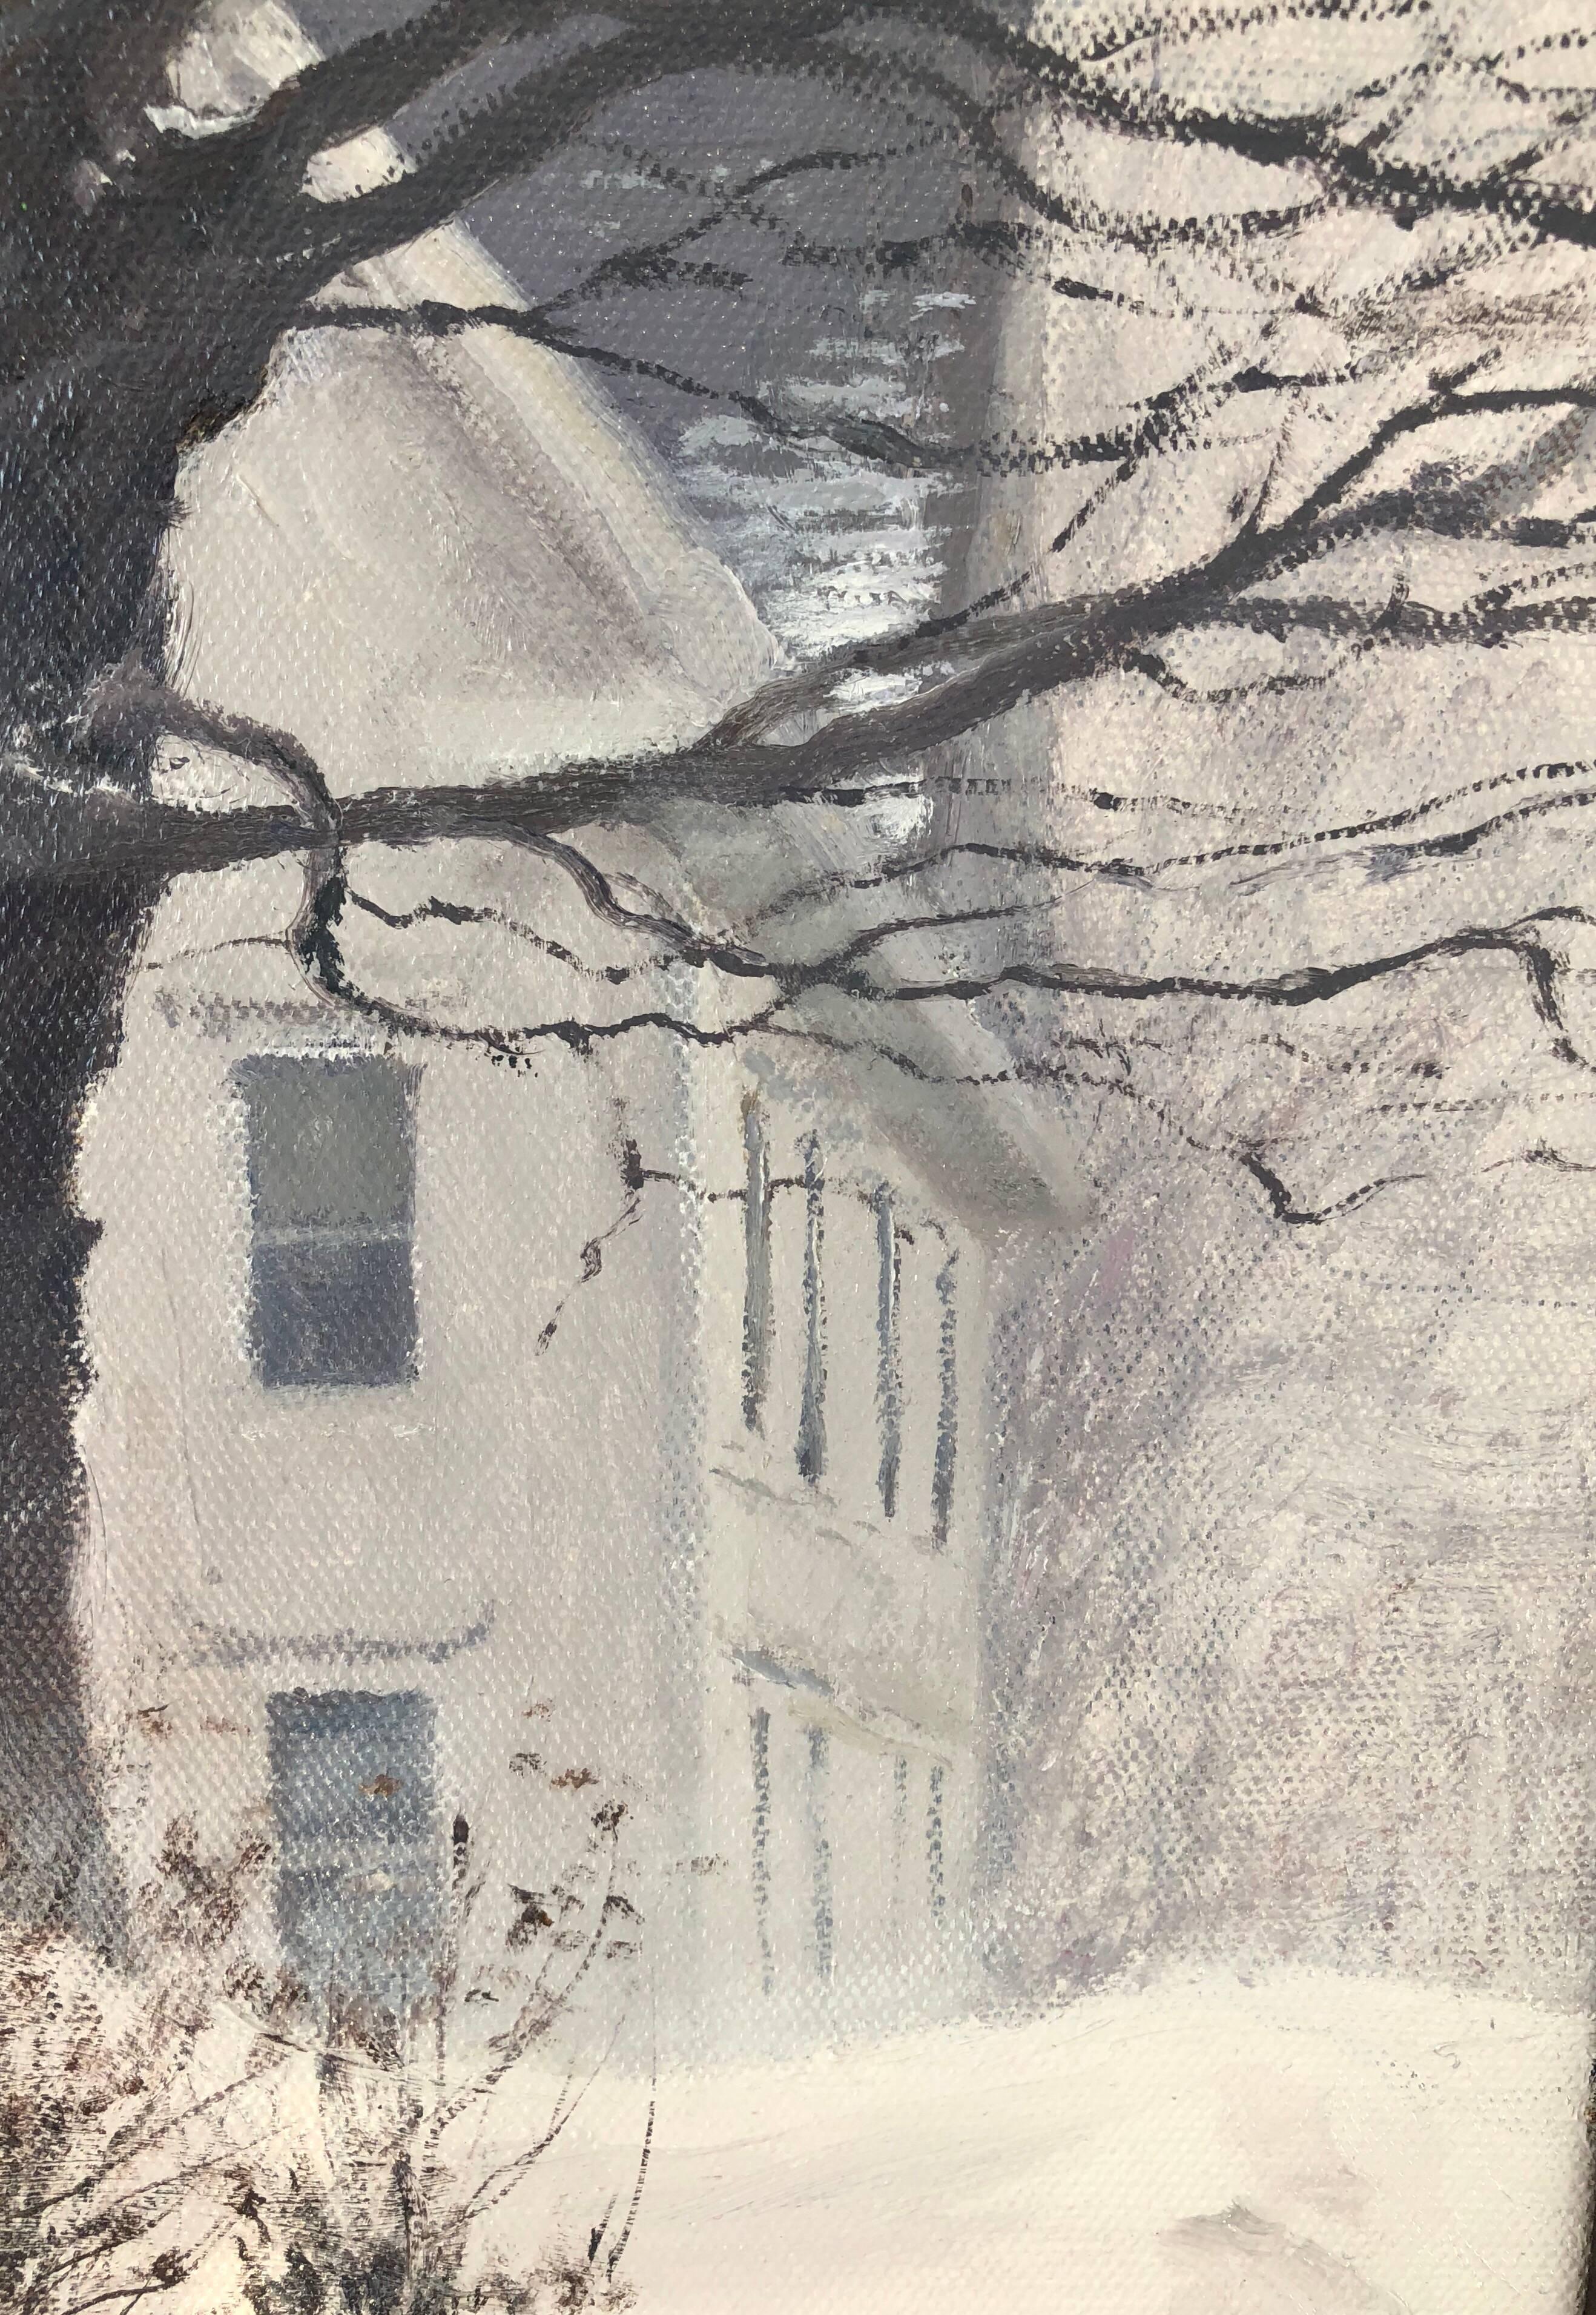 A self-taught painter, Brian Kliewer began showing his work in Camden, Maine, in the autumn of 1988. Collectors were soon taken with his paintings and he was given a solo show early in 1991. It was a near sellout. In 1995, his show, 